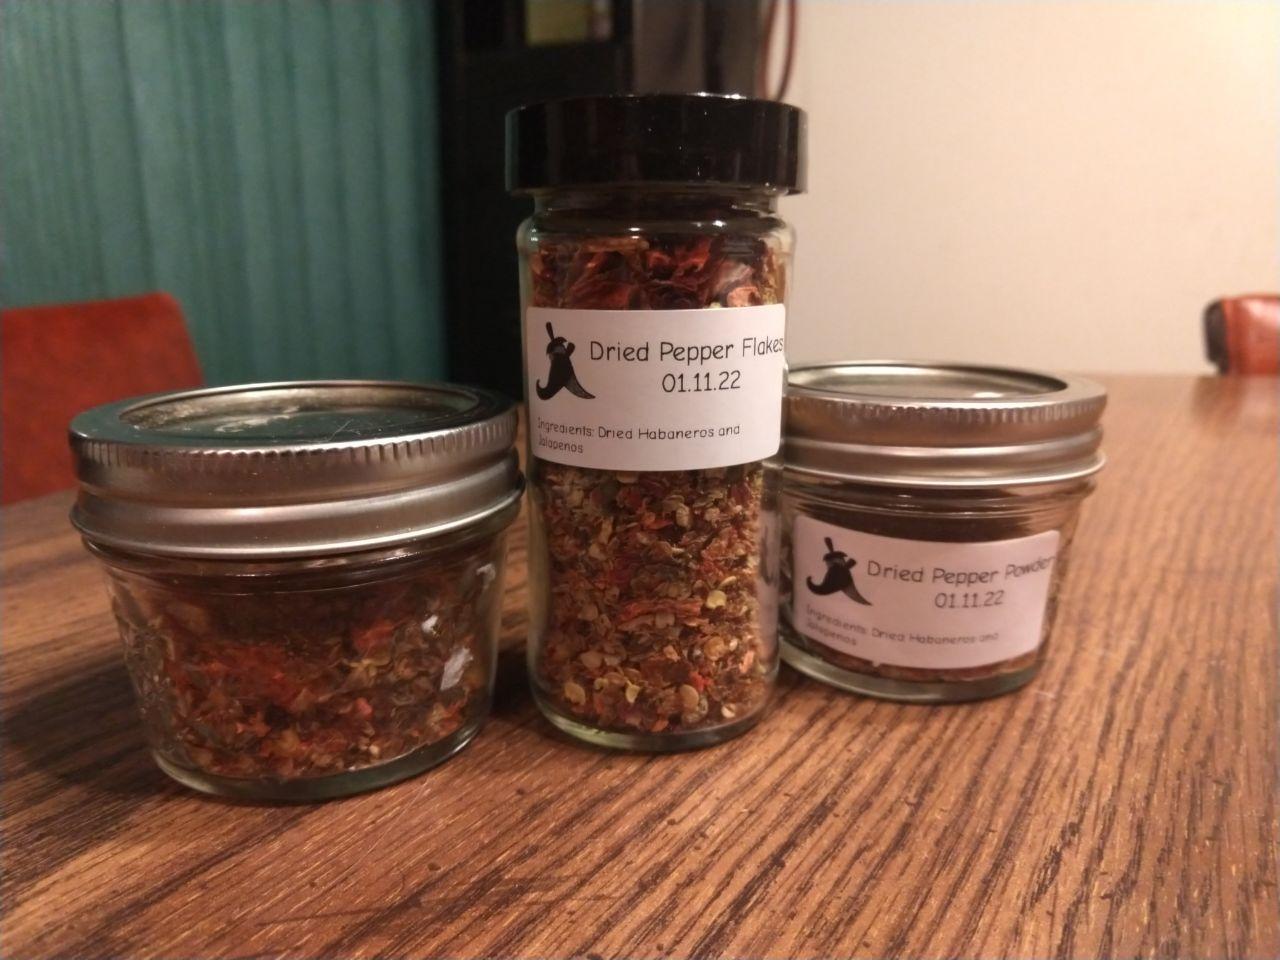 Pepper flakes made from dried jalapenos and habaneros picked from my garden.